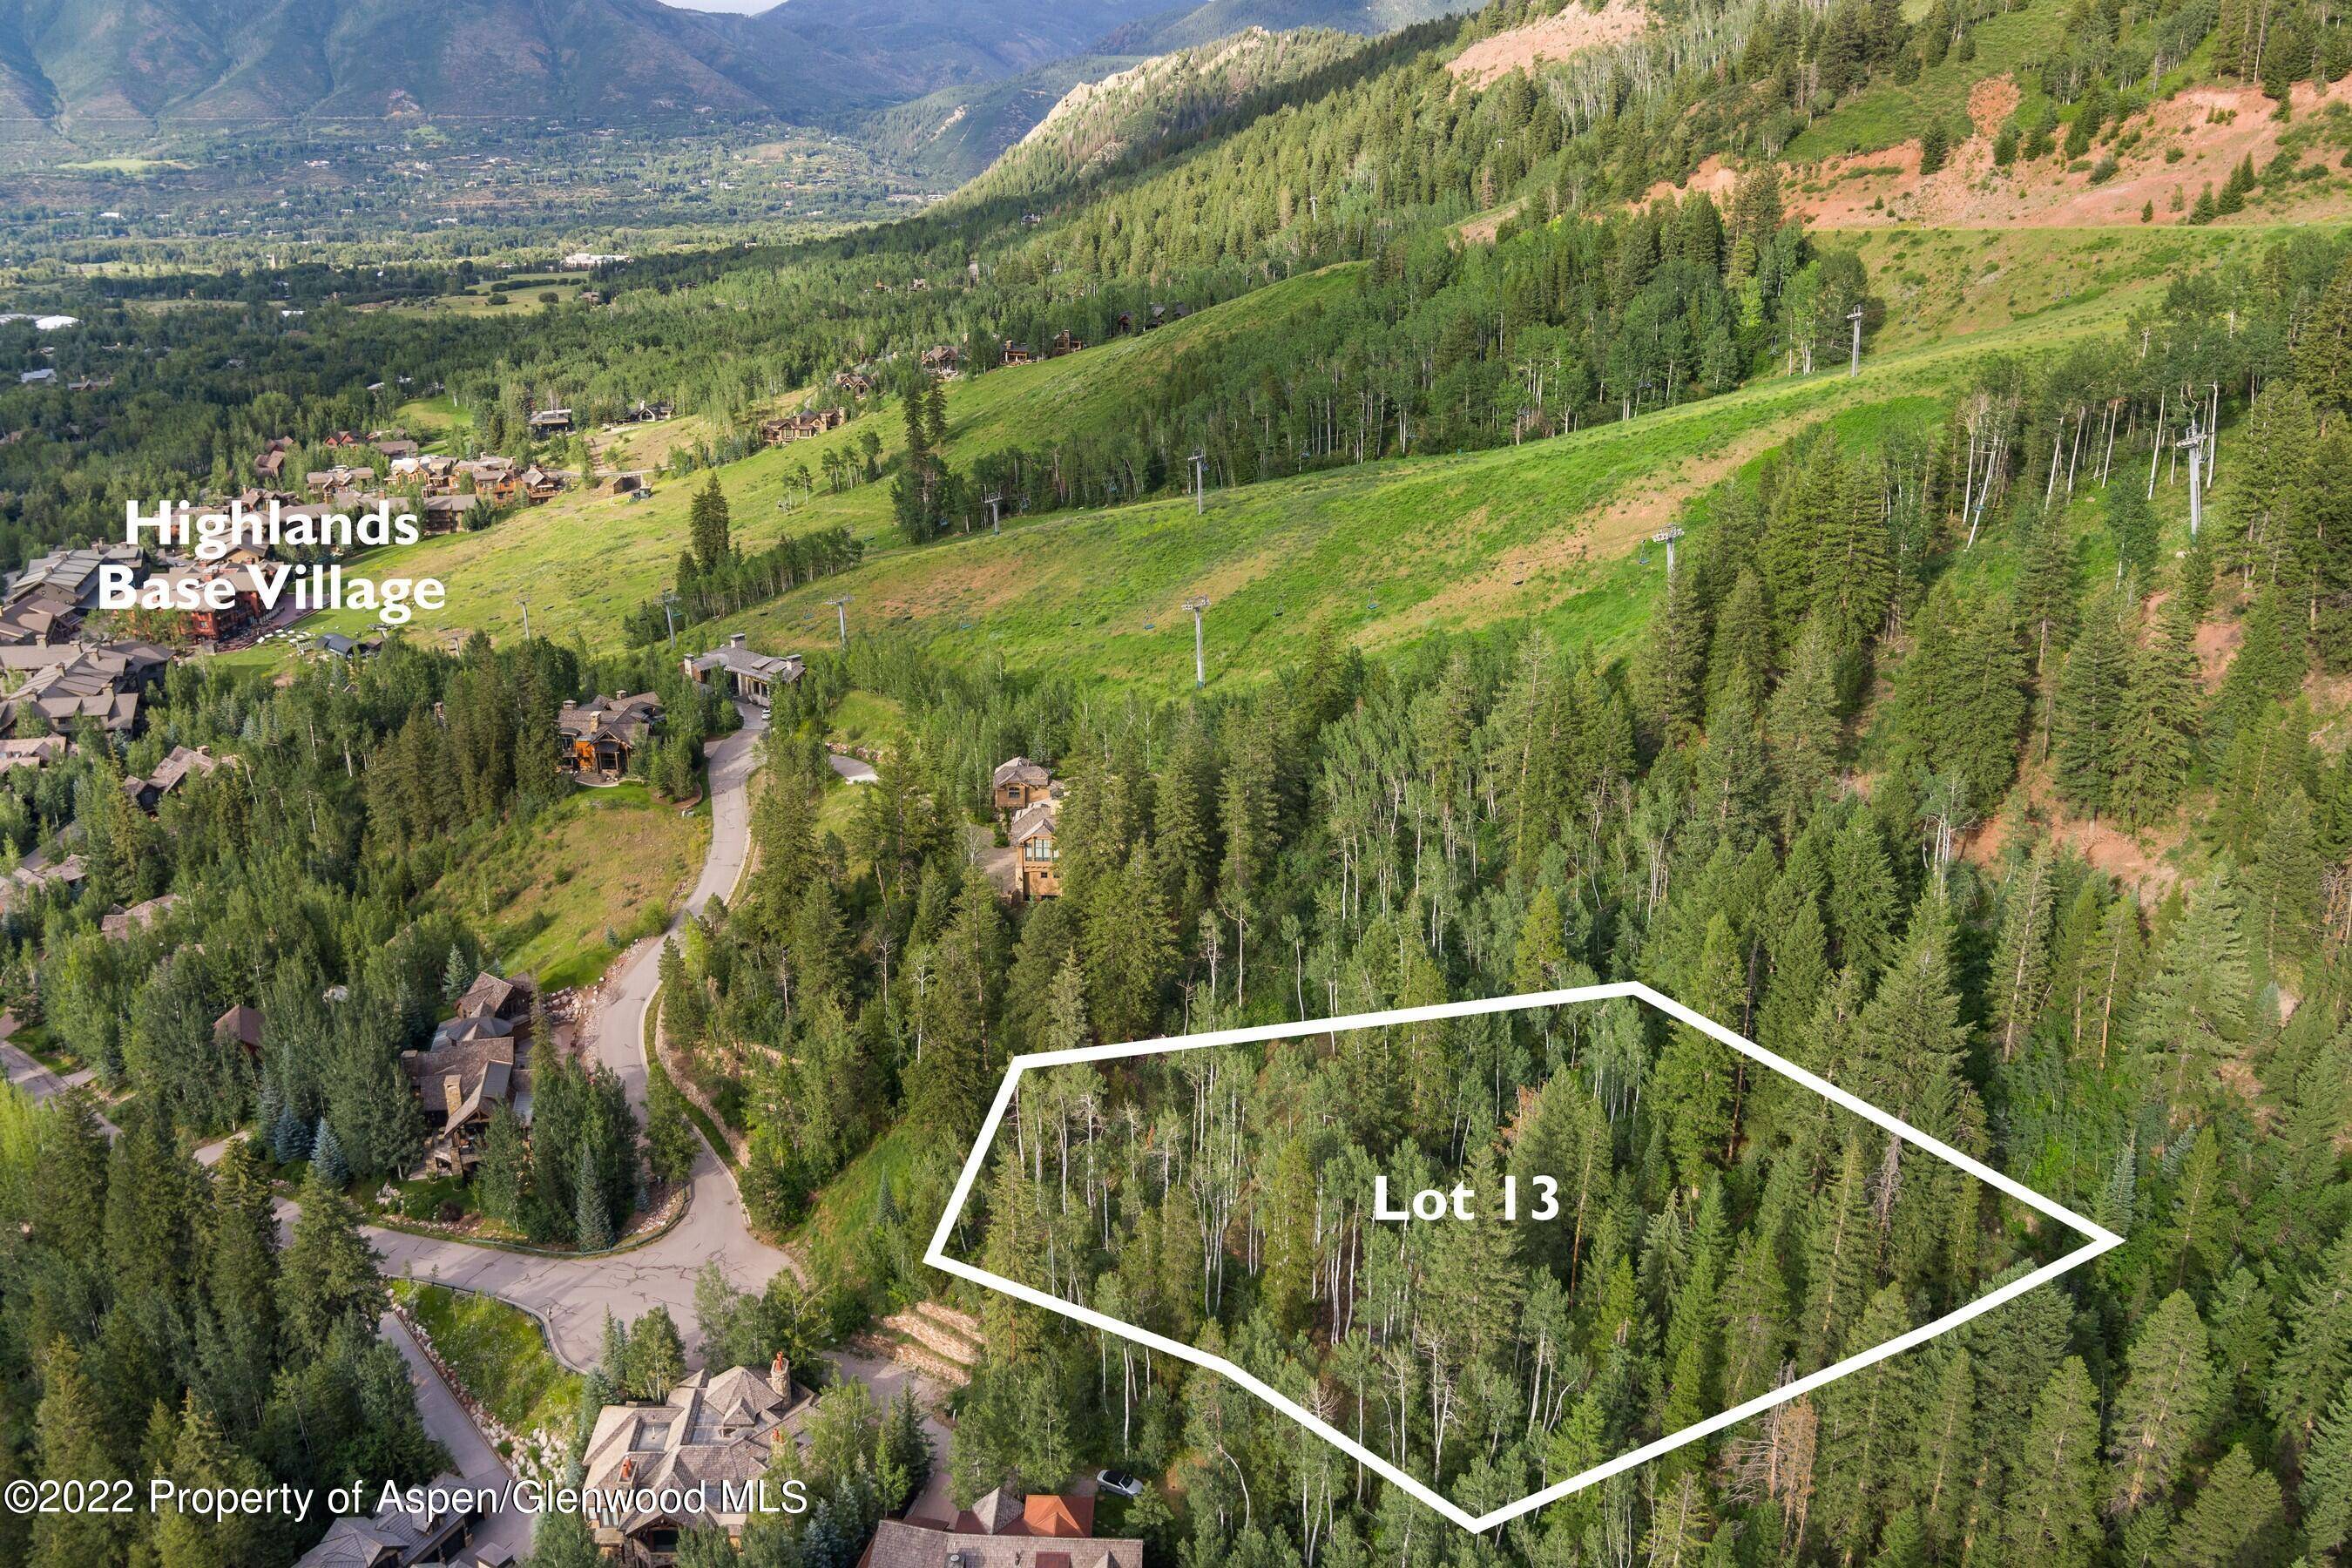 This is a rare opportunity to develop a trophy home on one of the last remaining ski accessible lots in all of Aspen.